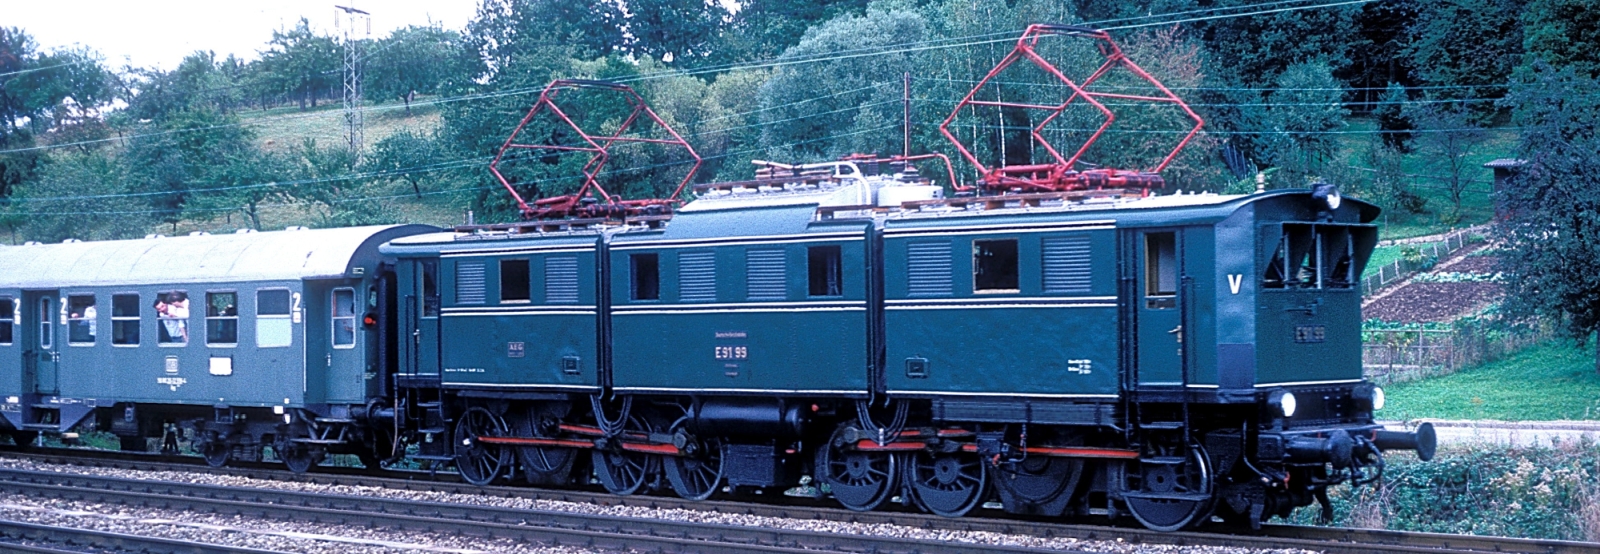 191 099 as a museum locomotive with the original number E 91 99 in October 1987 near Füssen